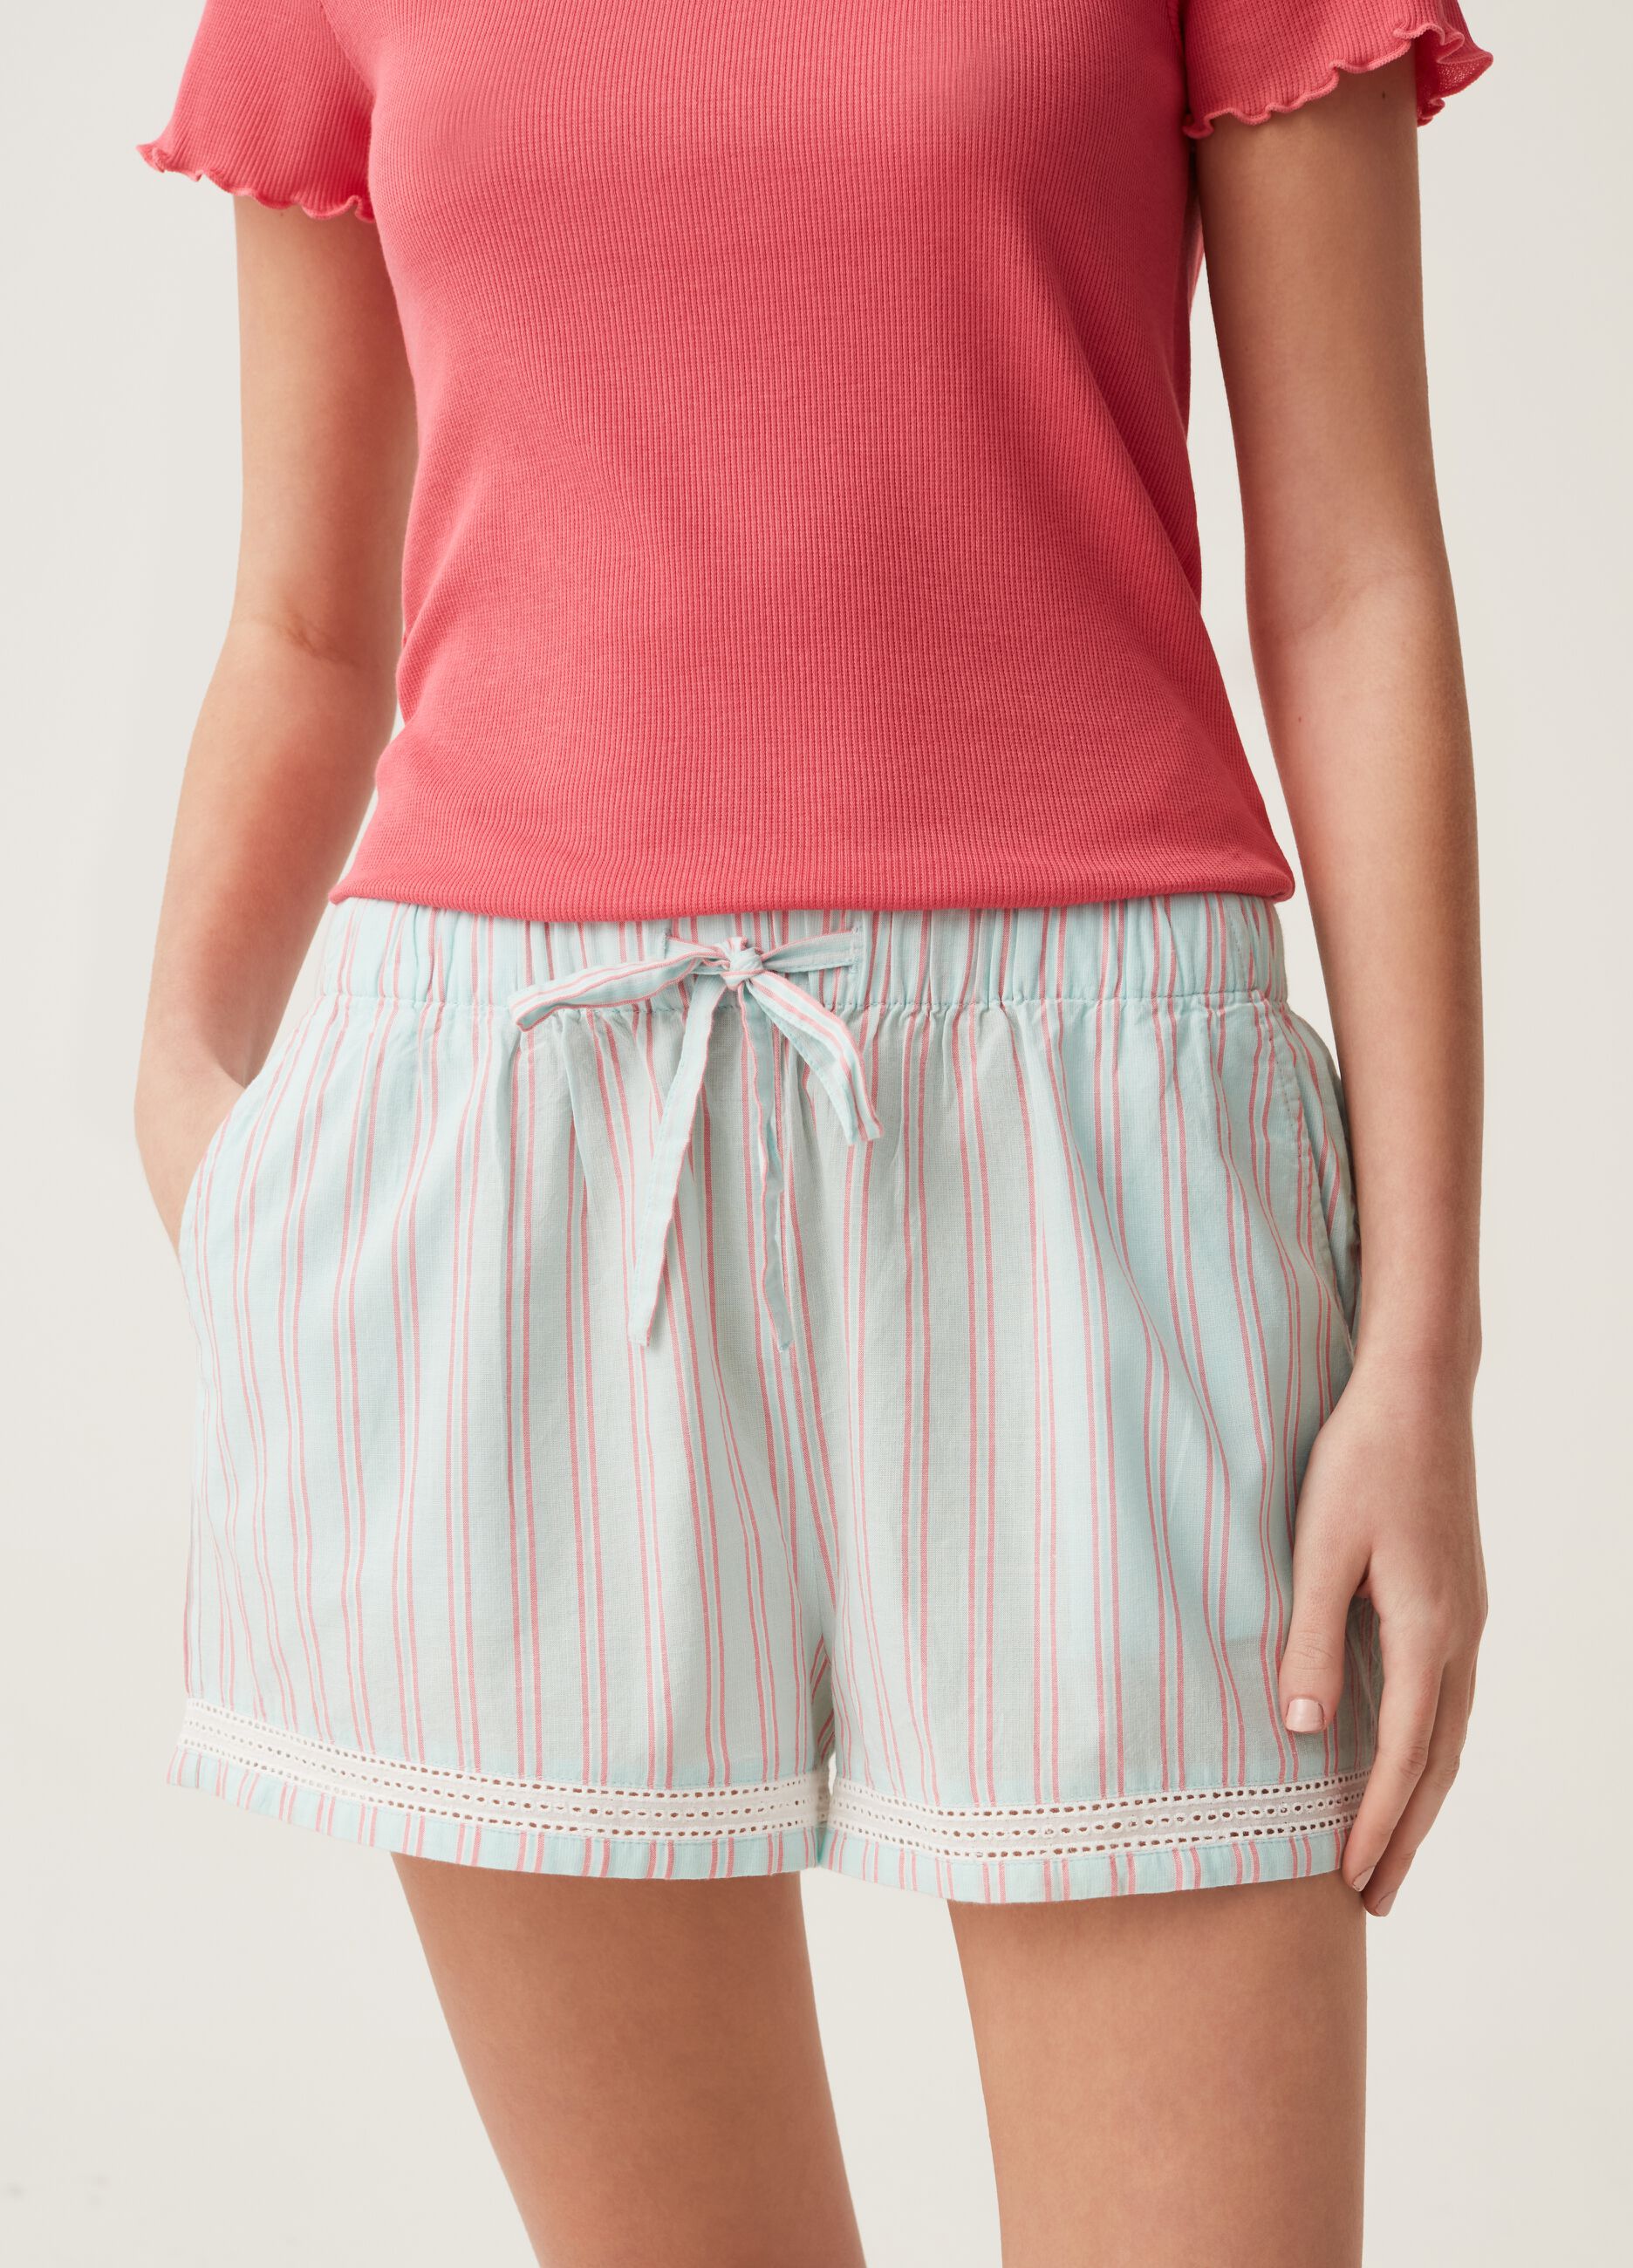 Shorts pigiama a righe con coulisse